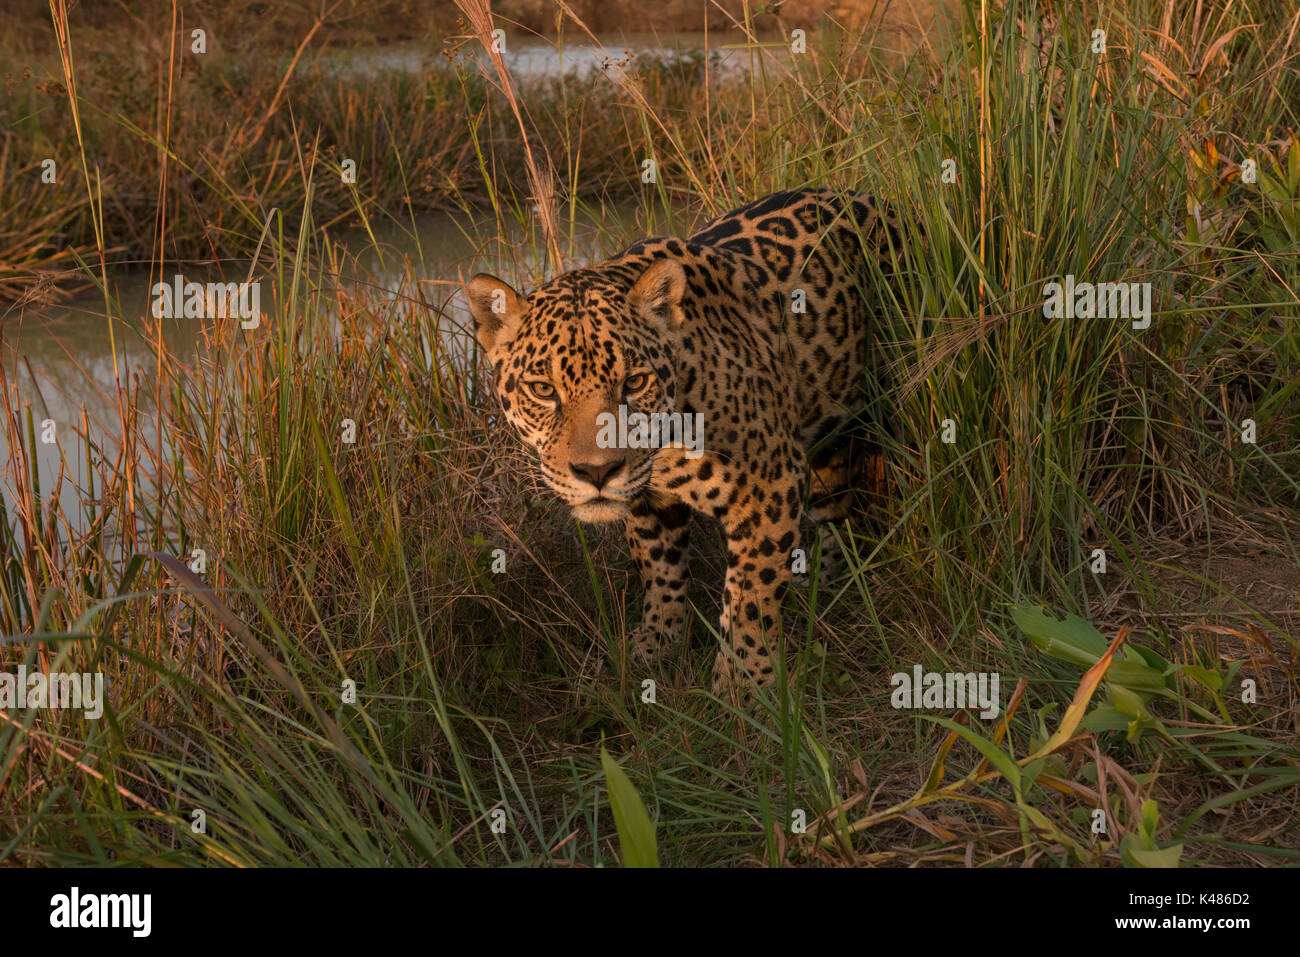 A Jaguar amid some grass in Central Brazil Stock Photo